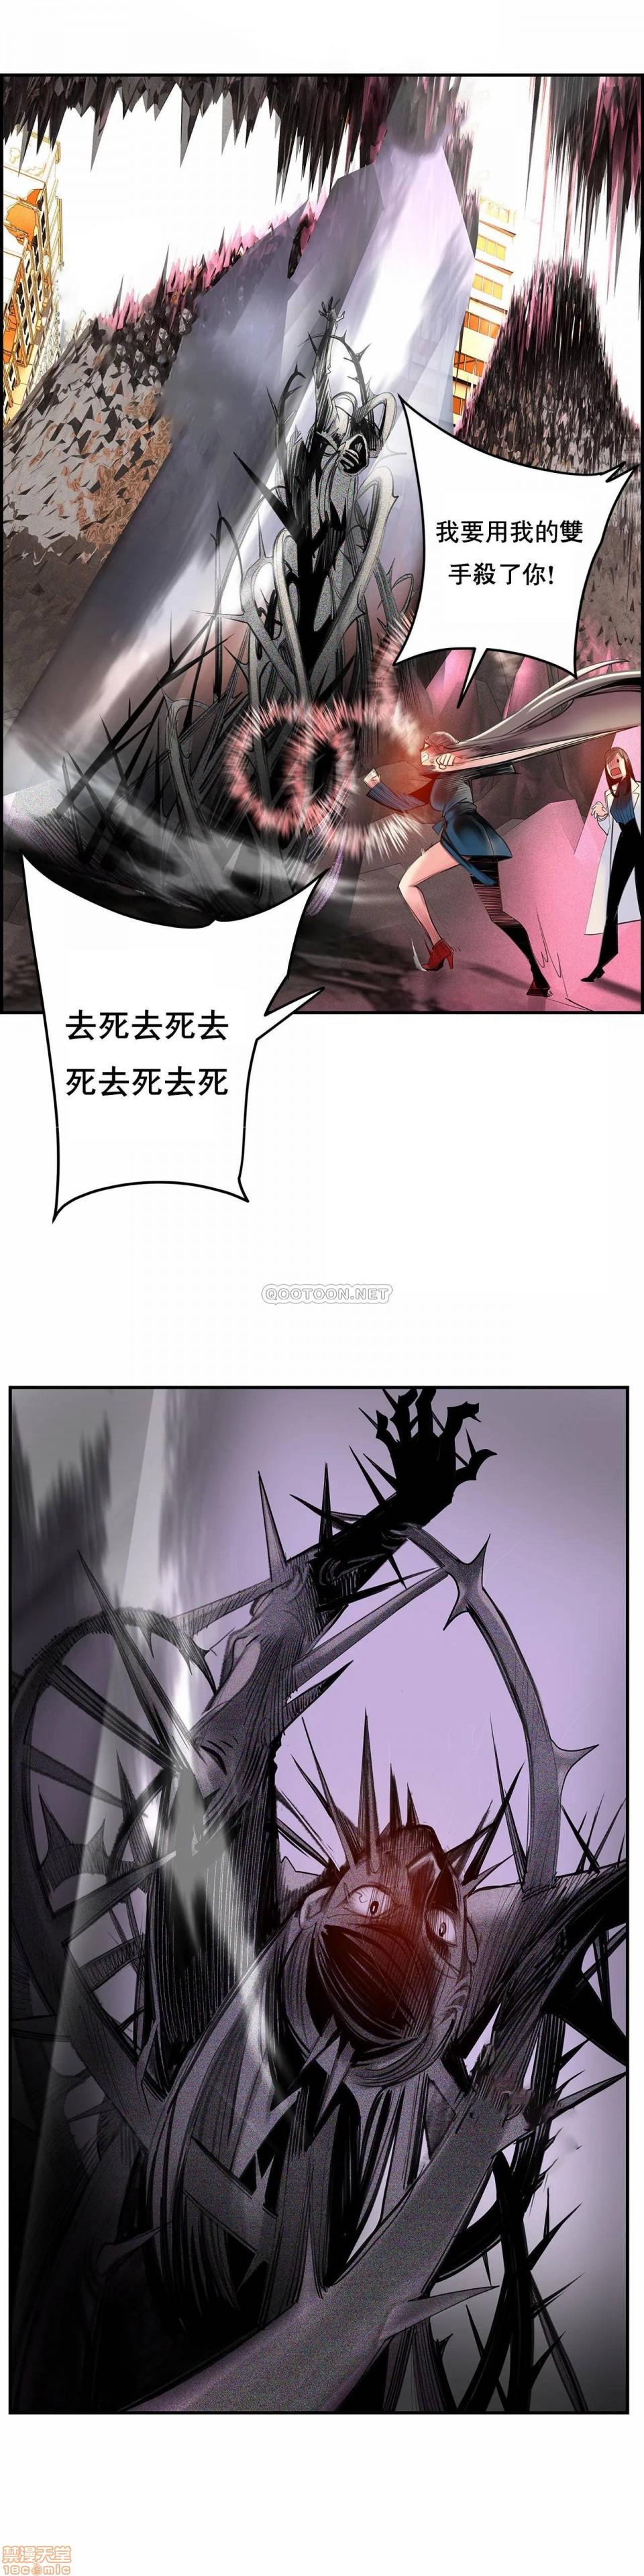 [Juder] Lilith`s Cord (第二季) Ch.77-93 end [Chinese] 143